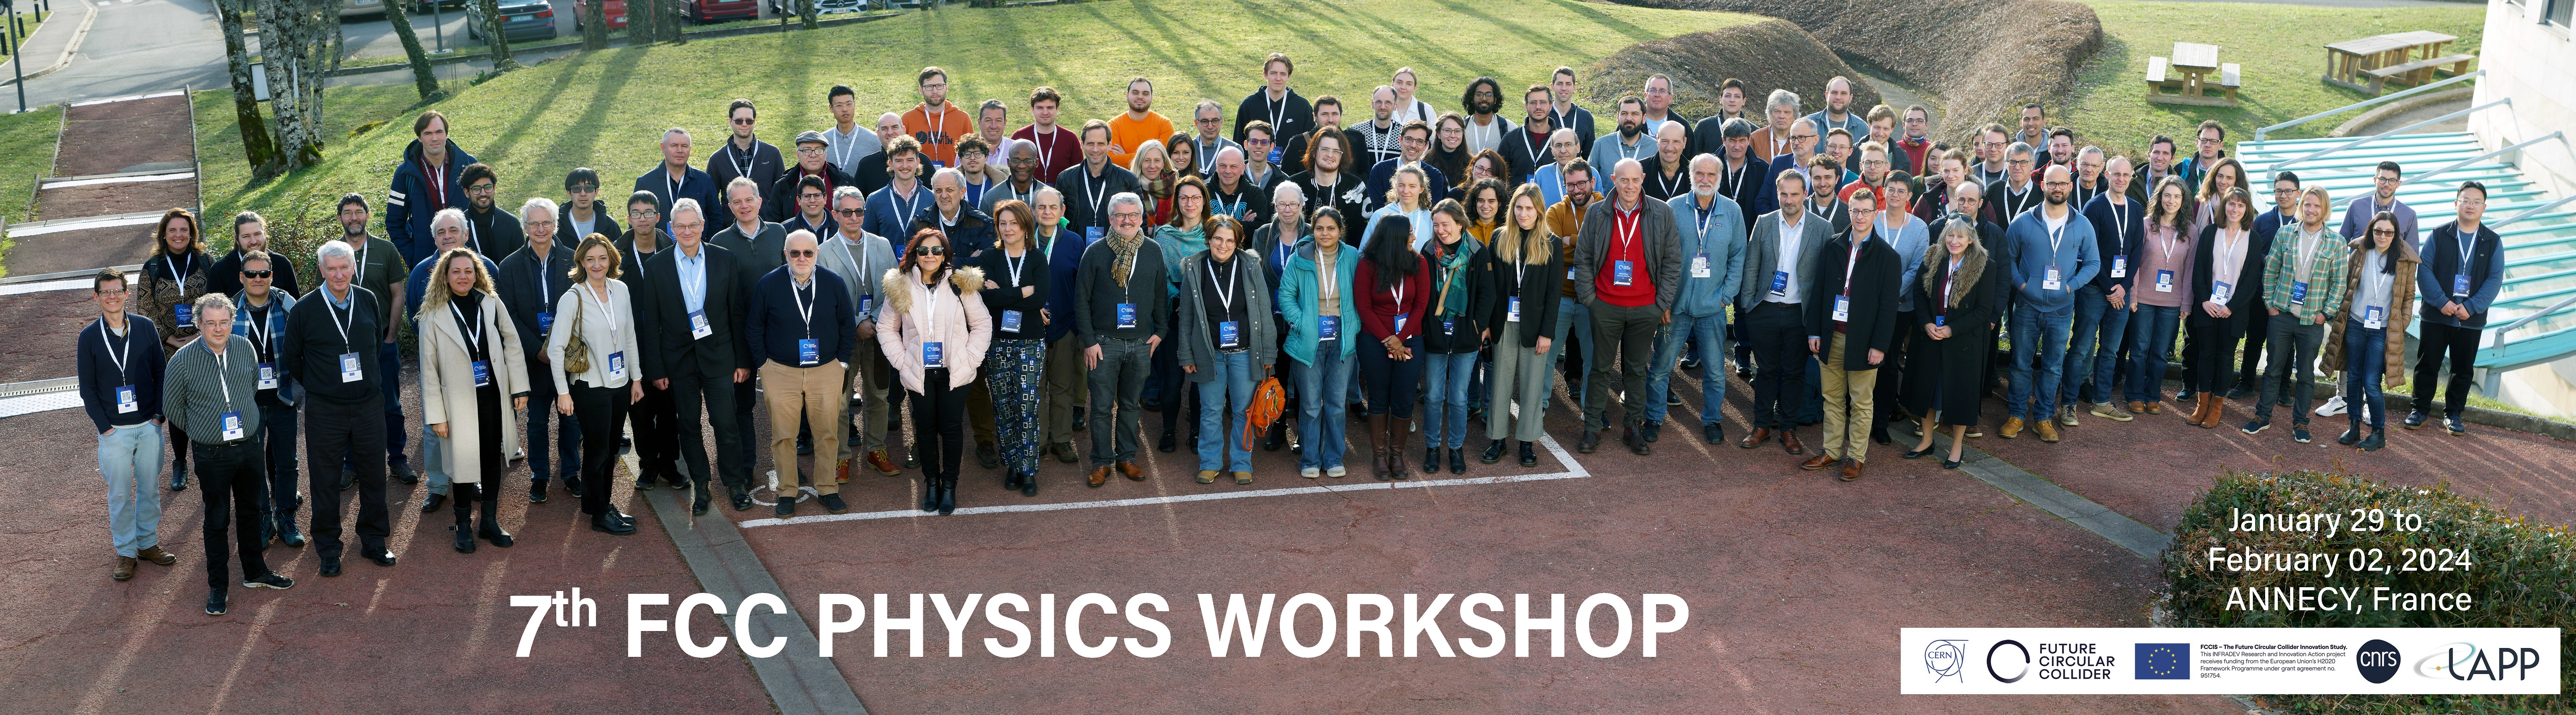 Attendees at the 7th FCC physics workshop in Annecy France (https://indico.cern.ch/event/1307378/), including Professor Sarah Eno. Click for high-resolution photo.